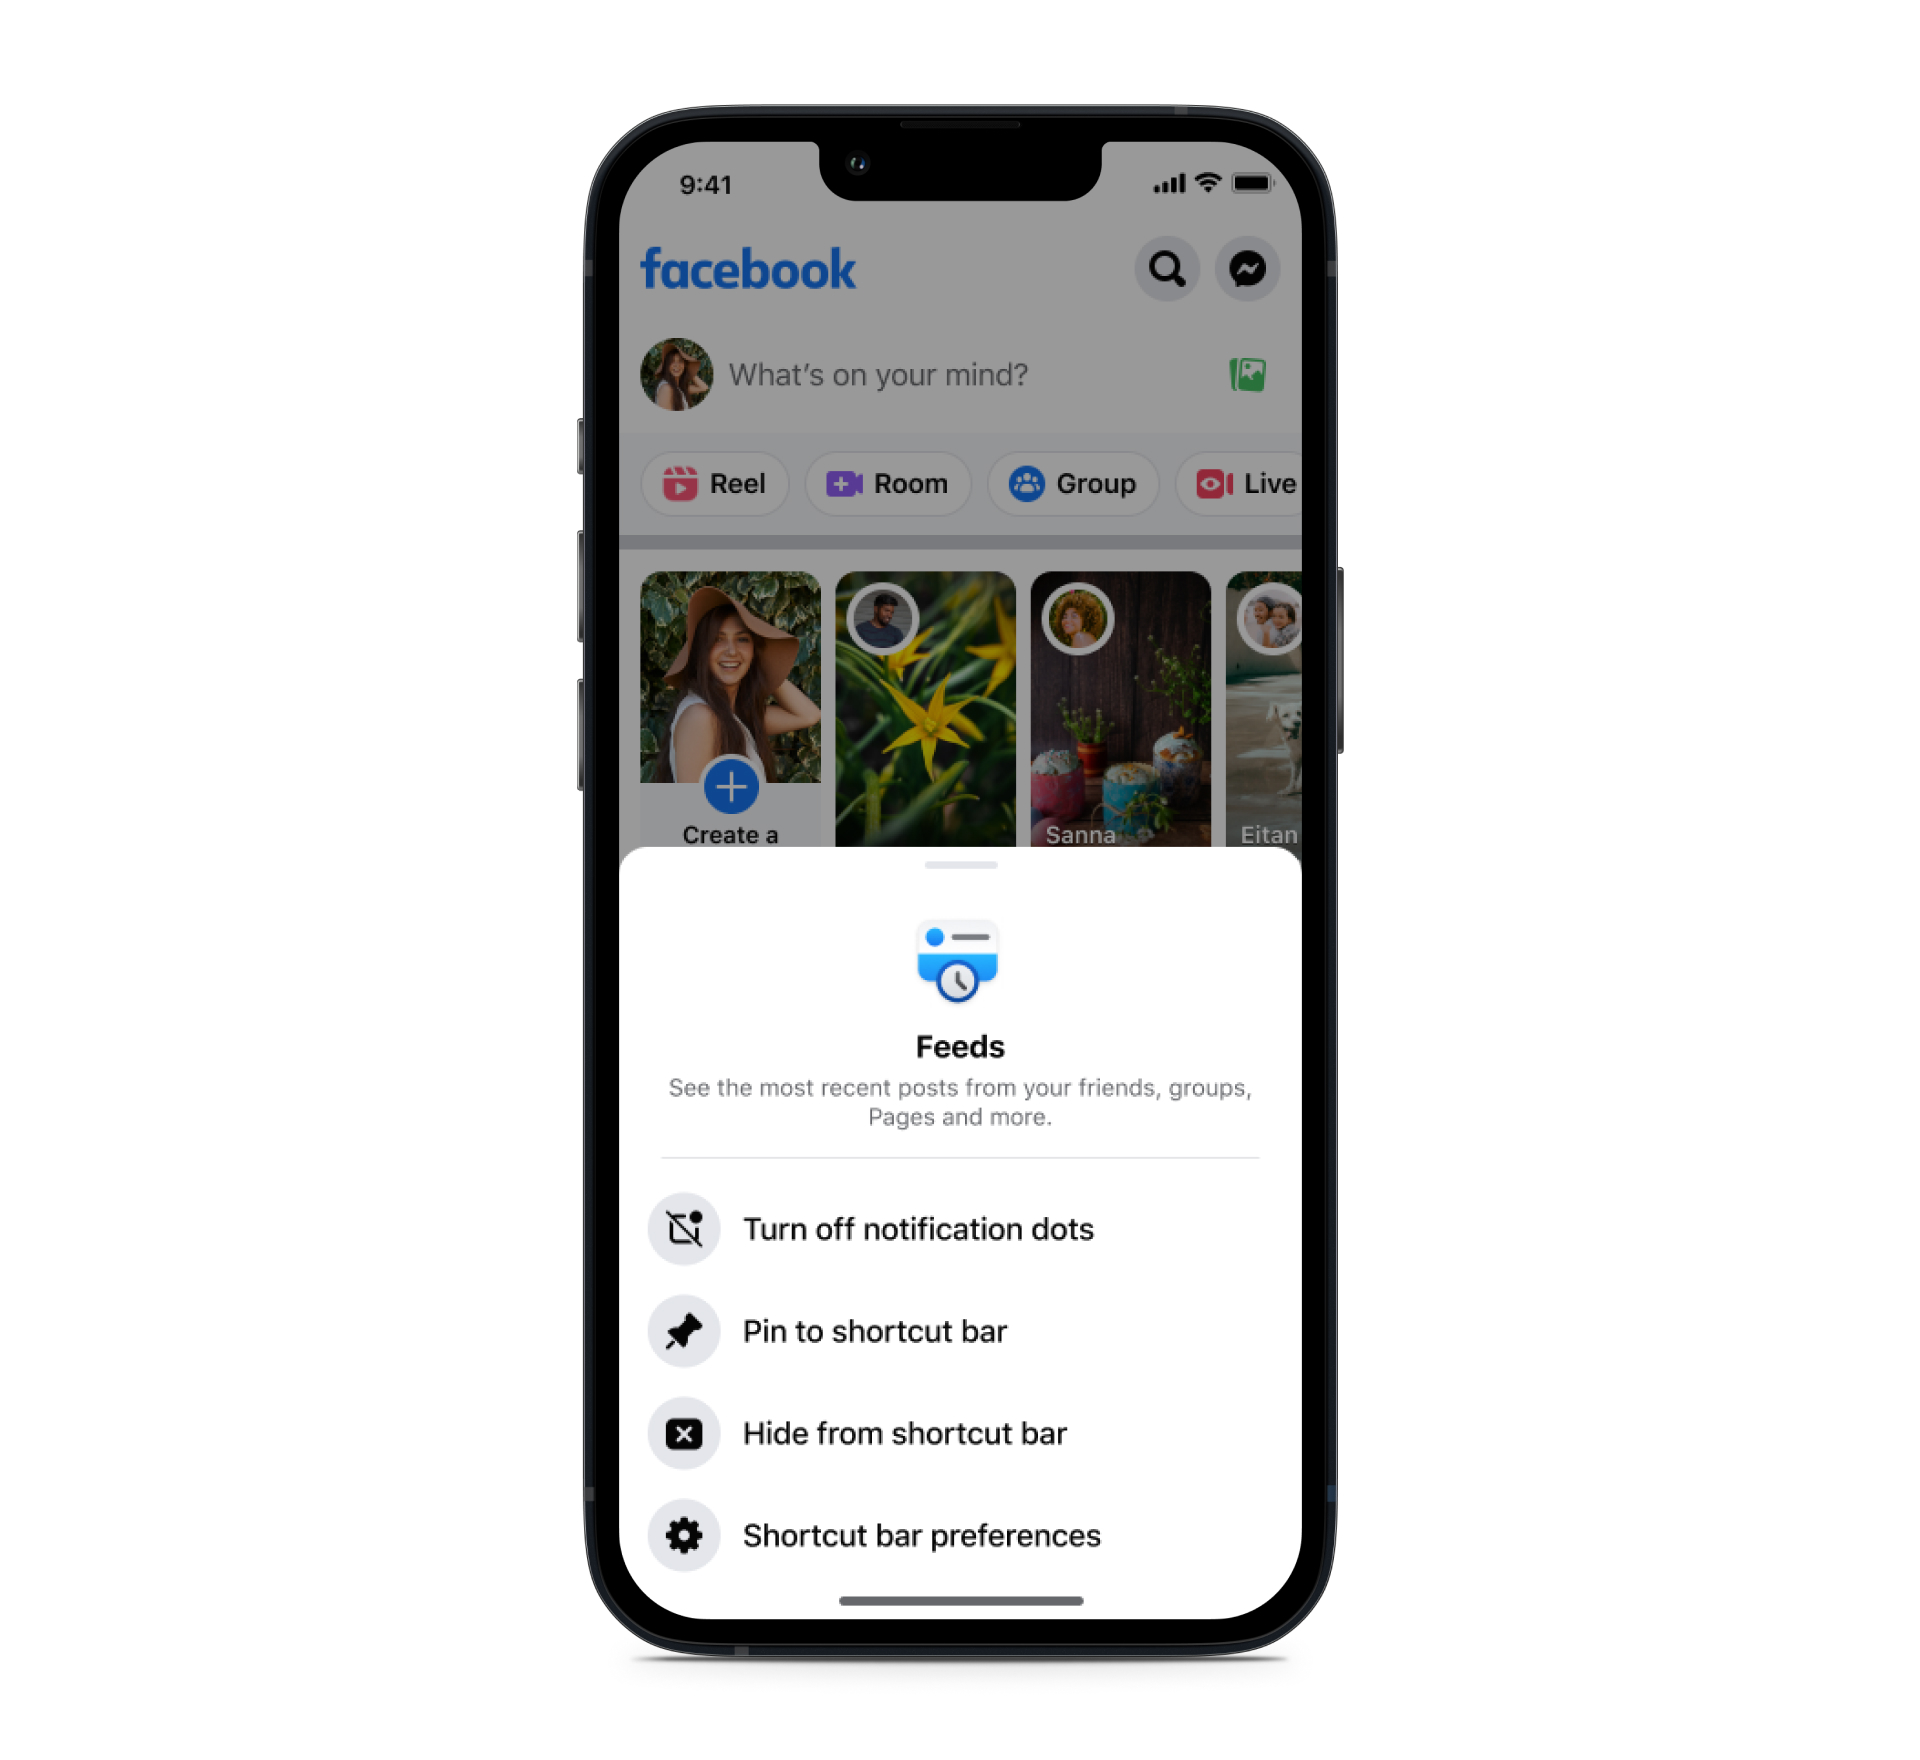 Pinning or hiding Feeds on Facebook's shortcuts bar